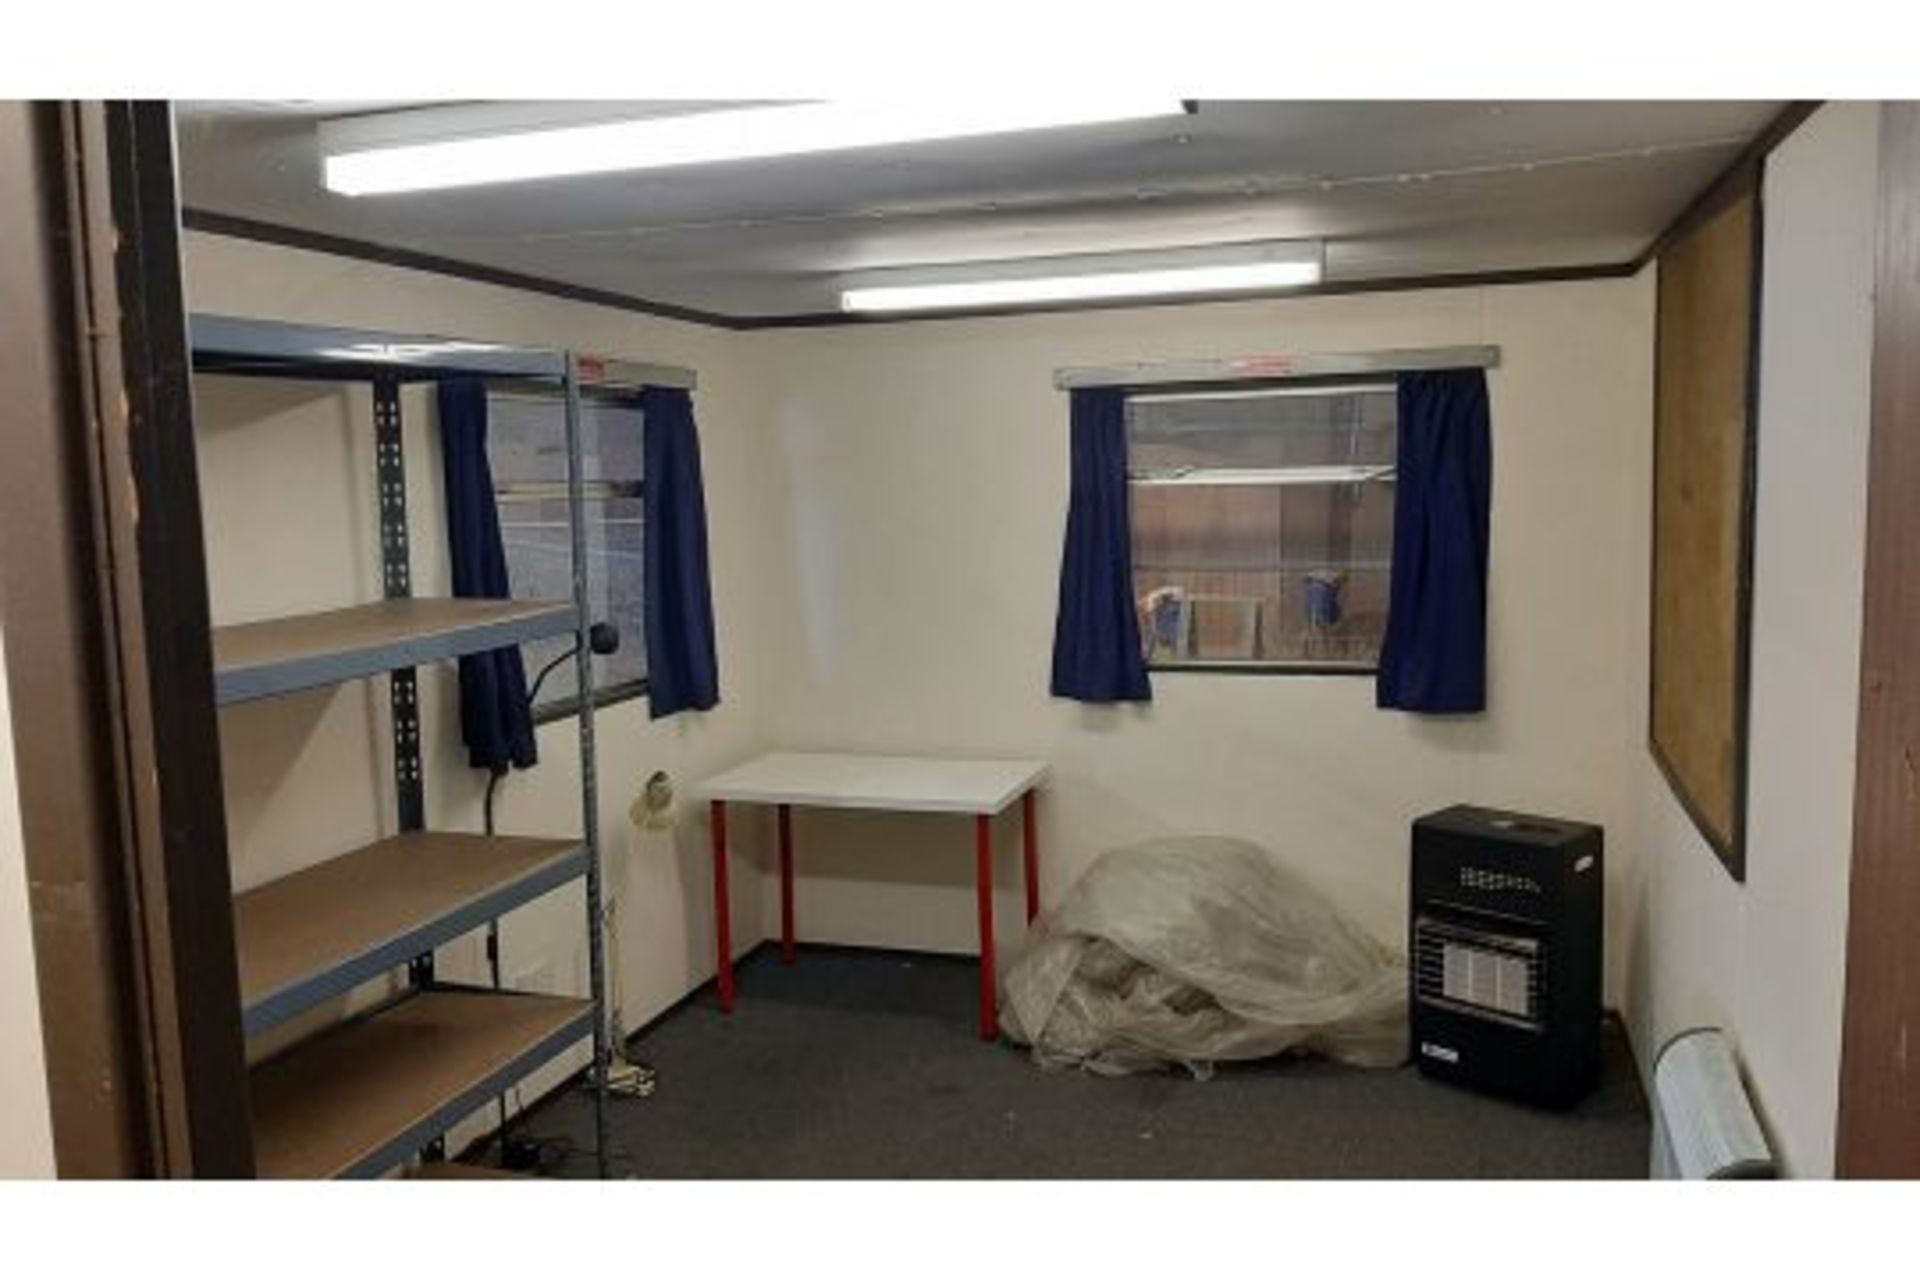 10ft x 32ft jack leg cabin. With two 10ftx 14ft rooms and hall. Used as office inside building. - Bild 15 aus 18